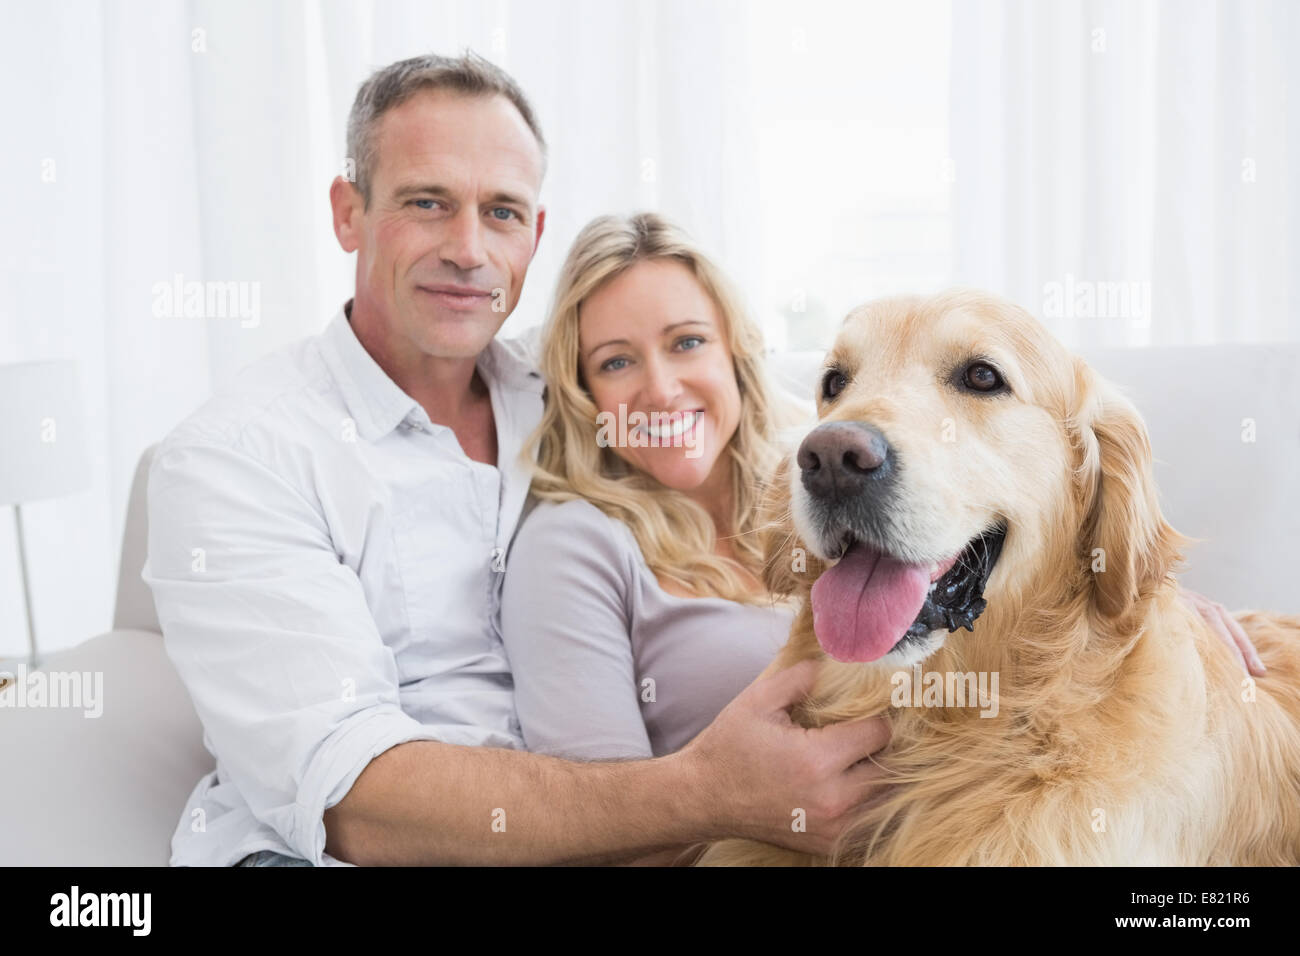 Smiling couple petting their golden retriever on the couch Stock Photo